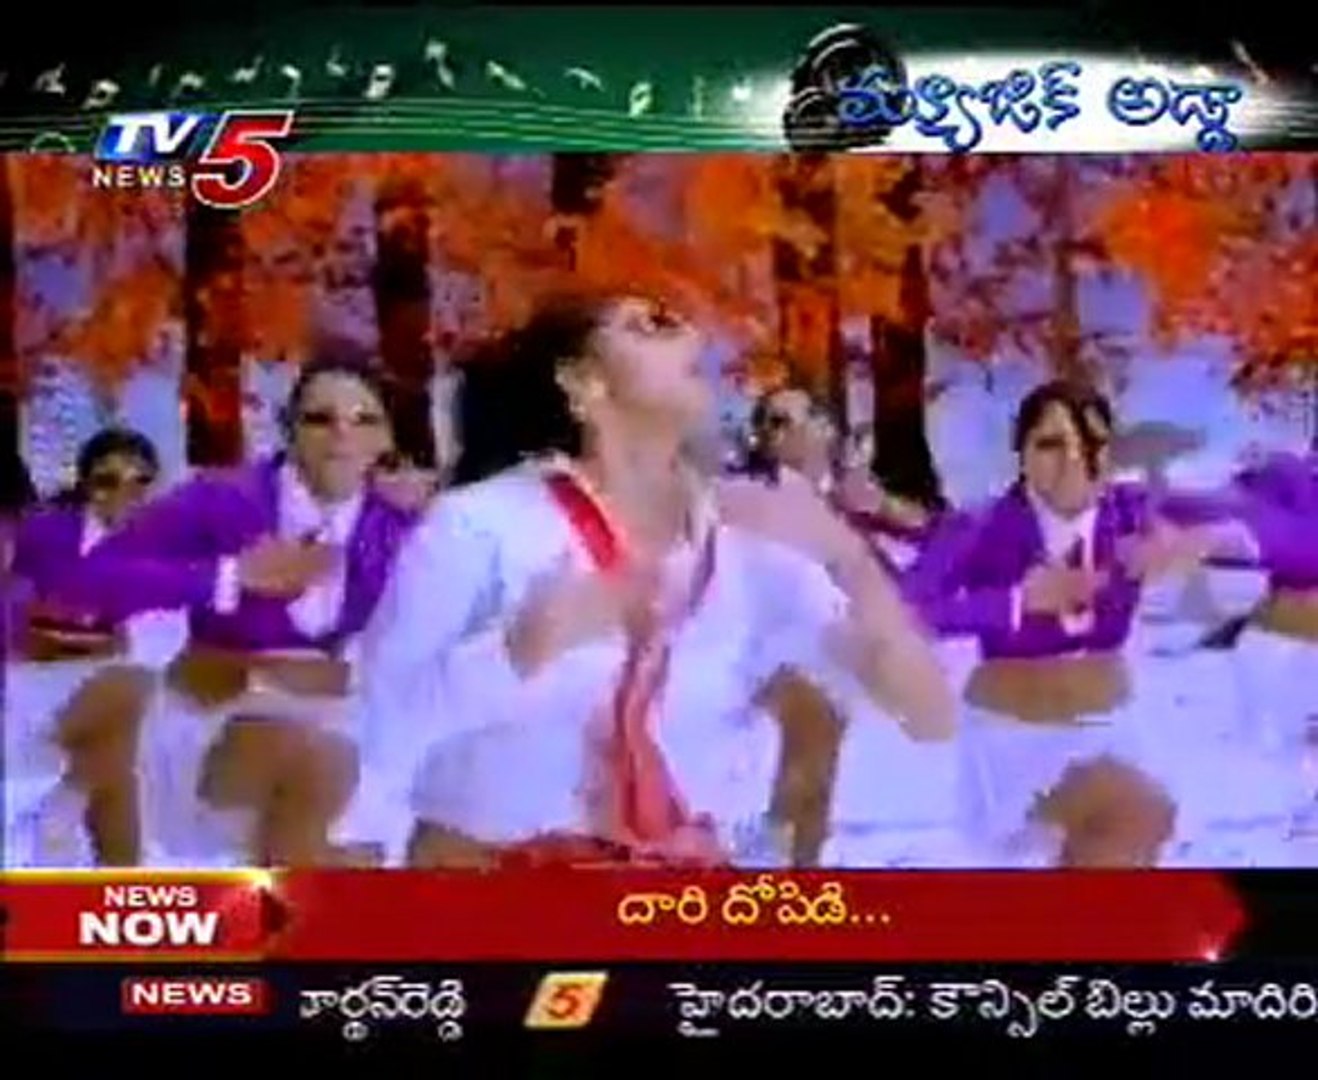 Music Adda - Top Songs in Latest Movies - Tollywood Top Songs - 02